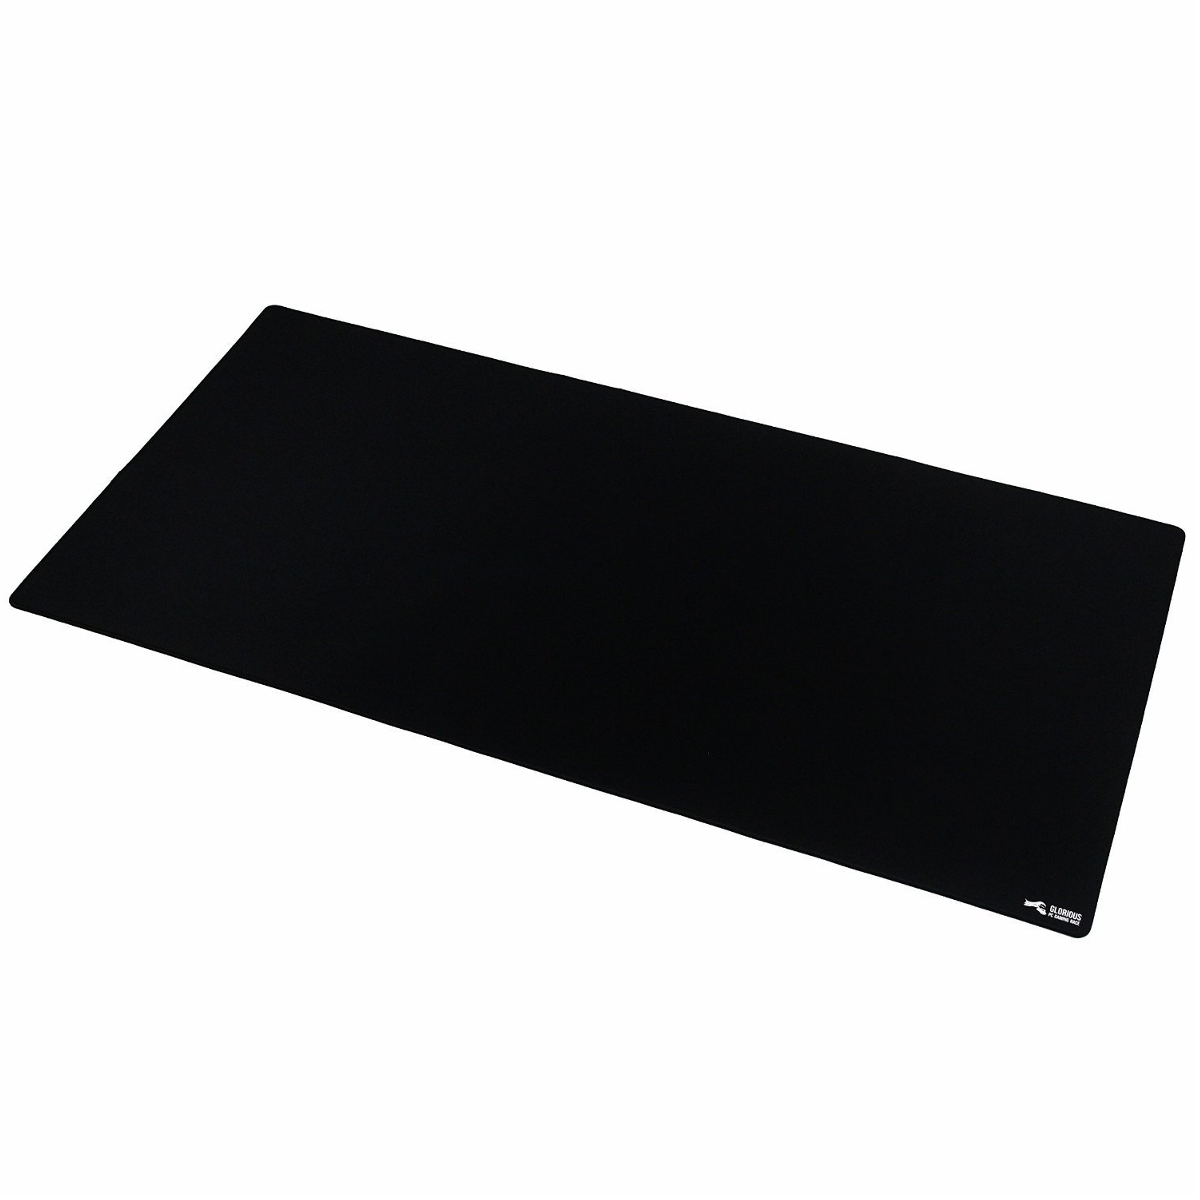 Glorious G-3XL Extended Gaming Mouse Mat - Black 1220x610x3mm